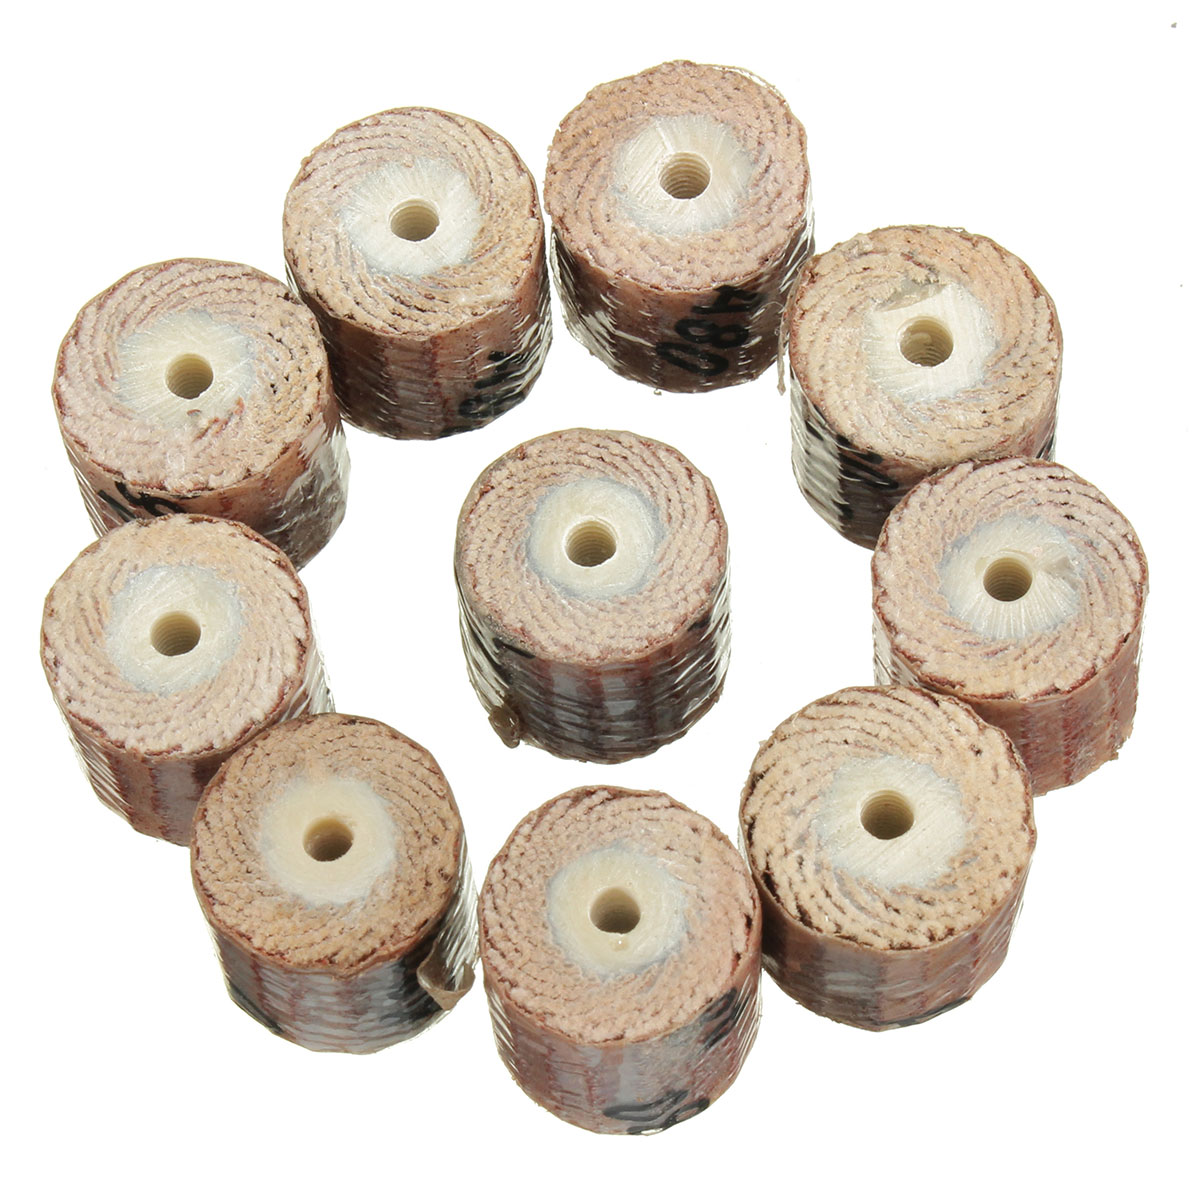 10pcs-12mm-Sandpaper-Grinding-Wheel-80-600-Grit-for-Rotary-Tools-982946-2